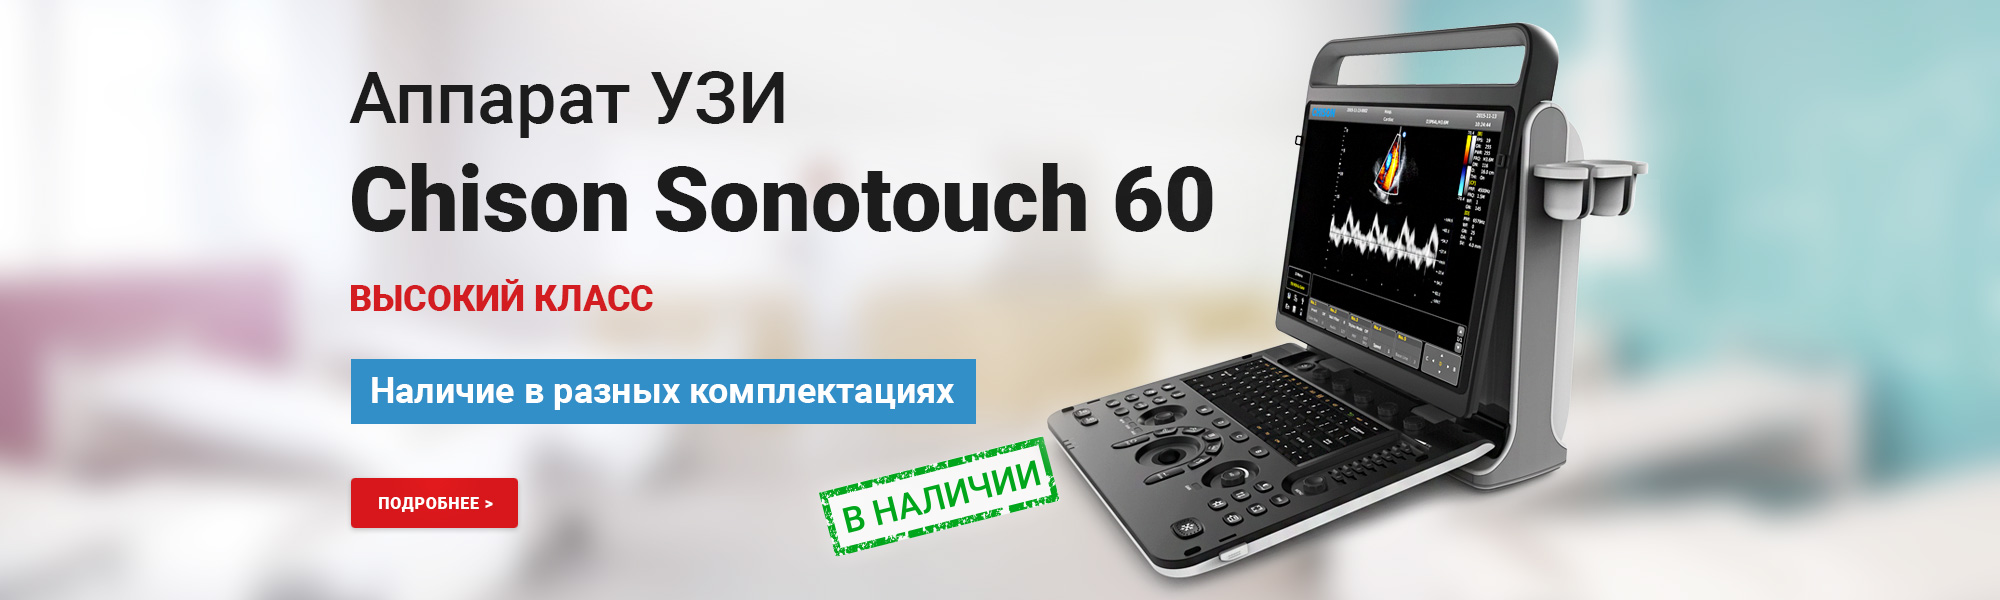 Chison Sonotouch 60